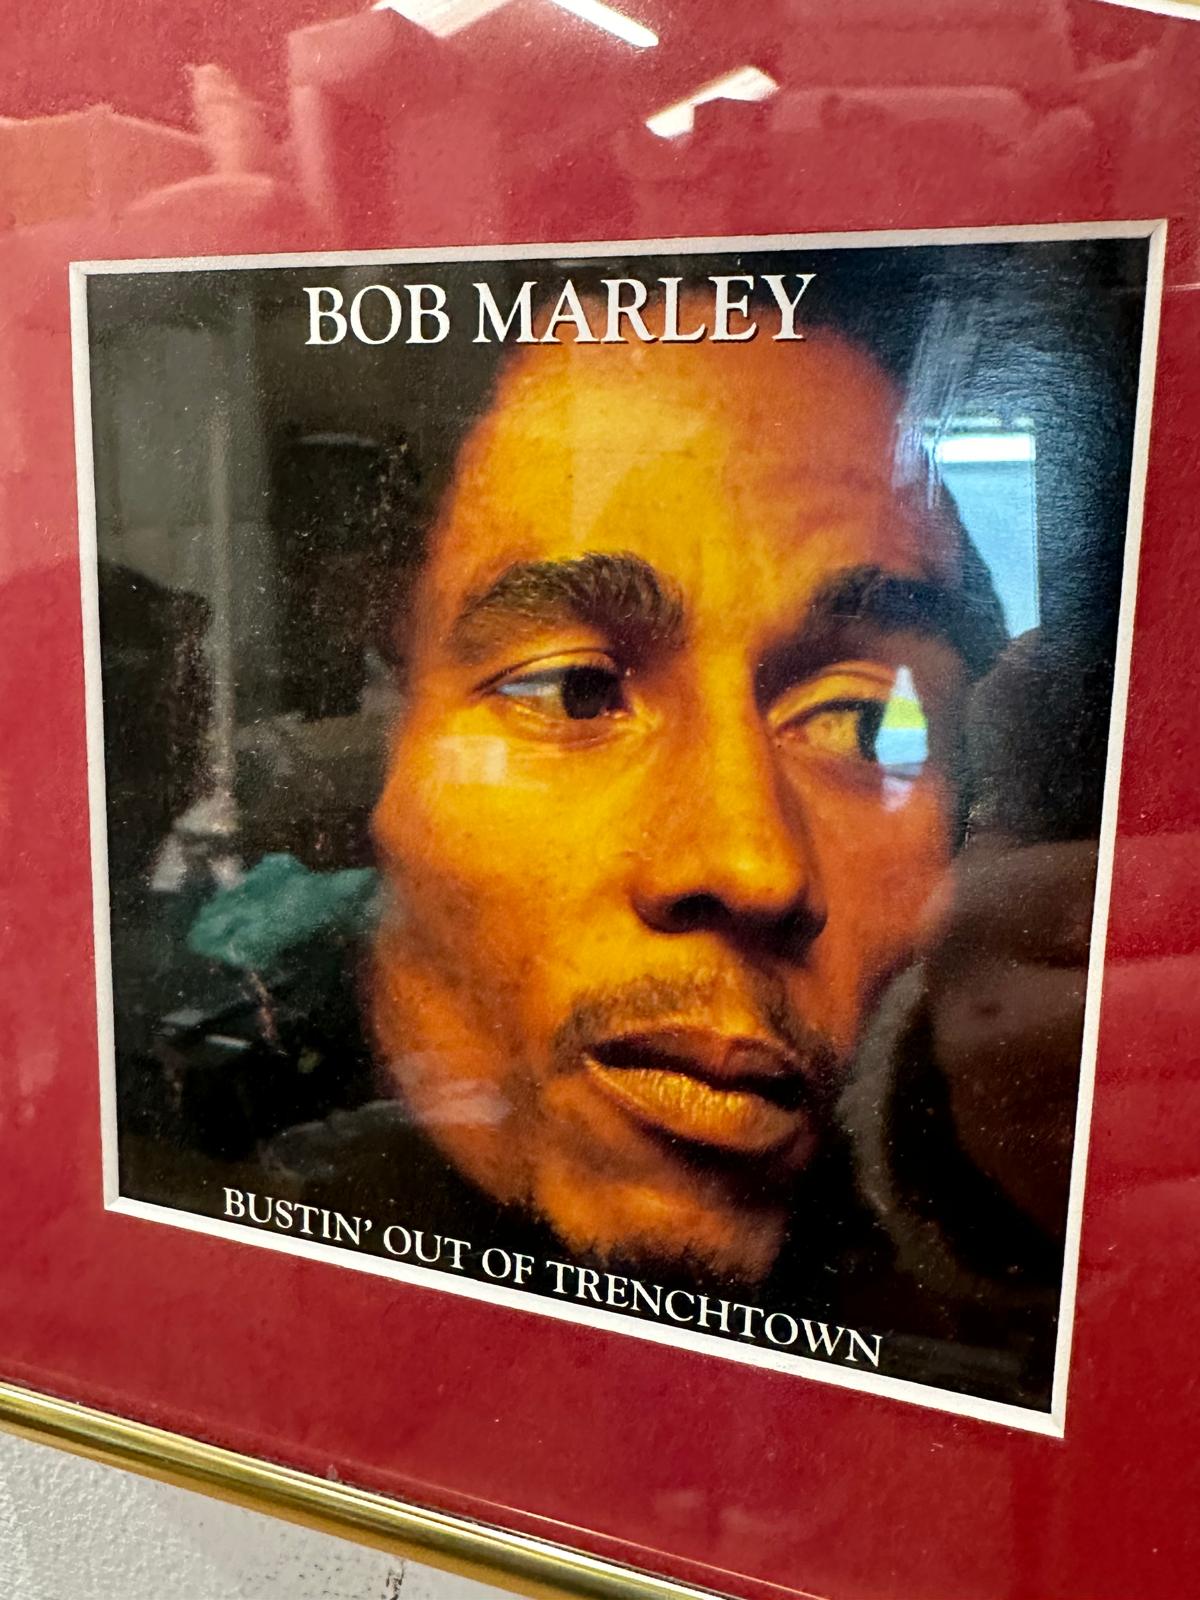 Bob Marley gold disc for the album "Bust In Out Of Trench Town" 3 of 200 (40cm x 50cm) - Image 2 of 3